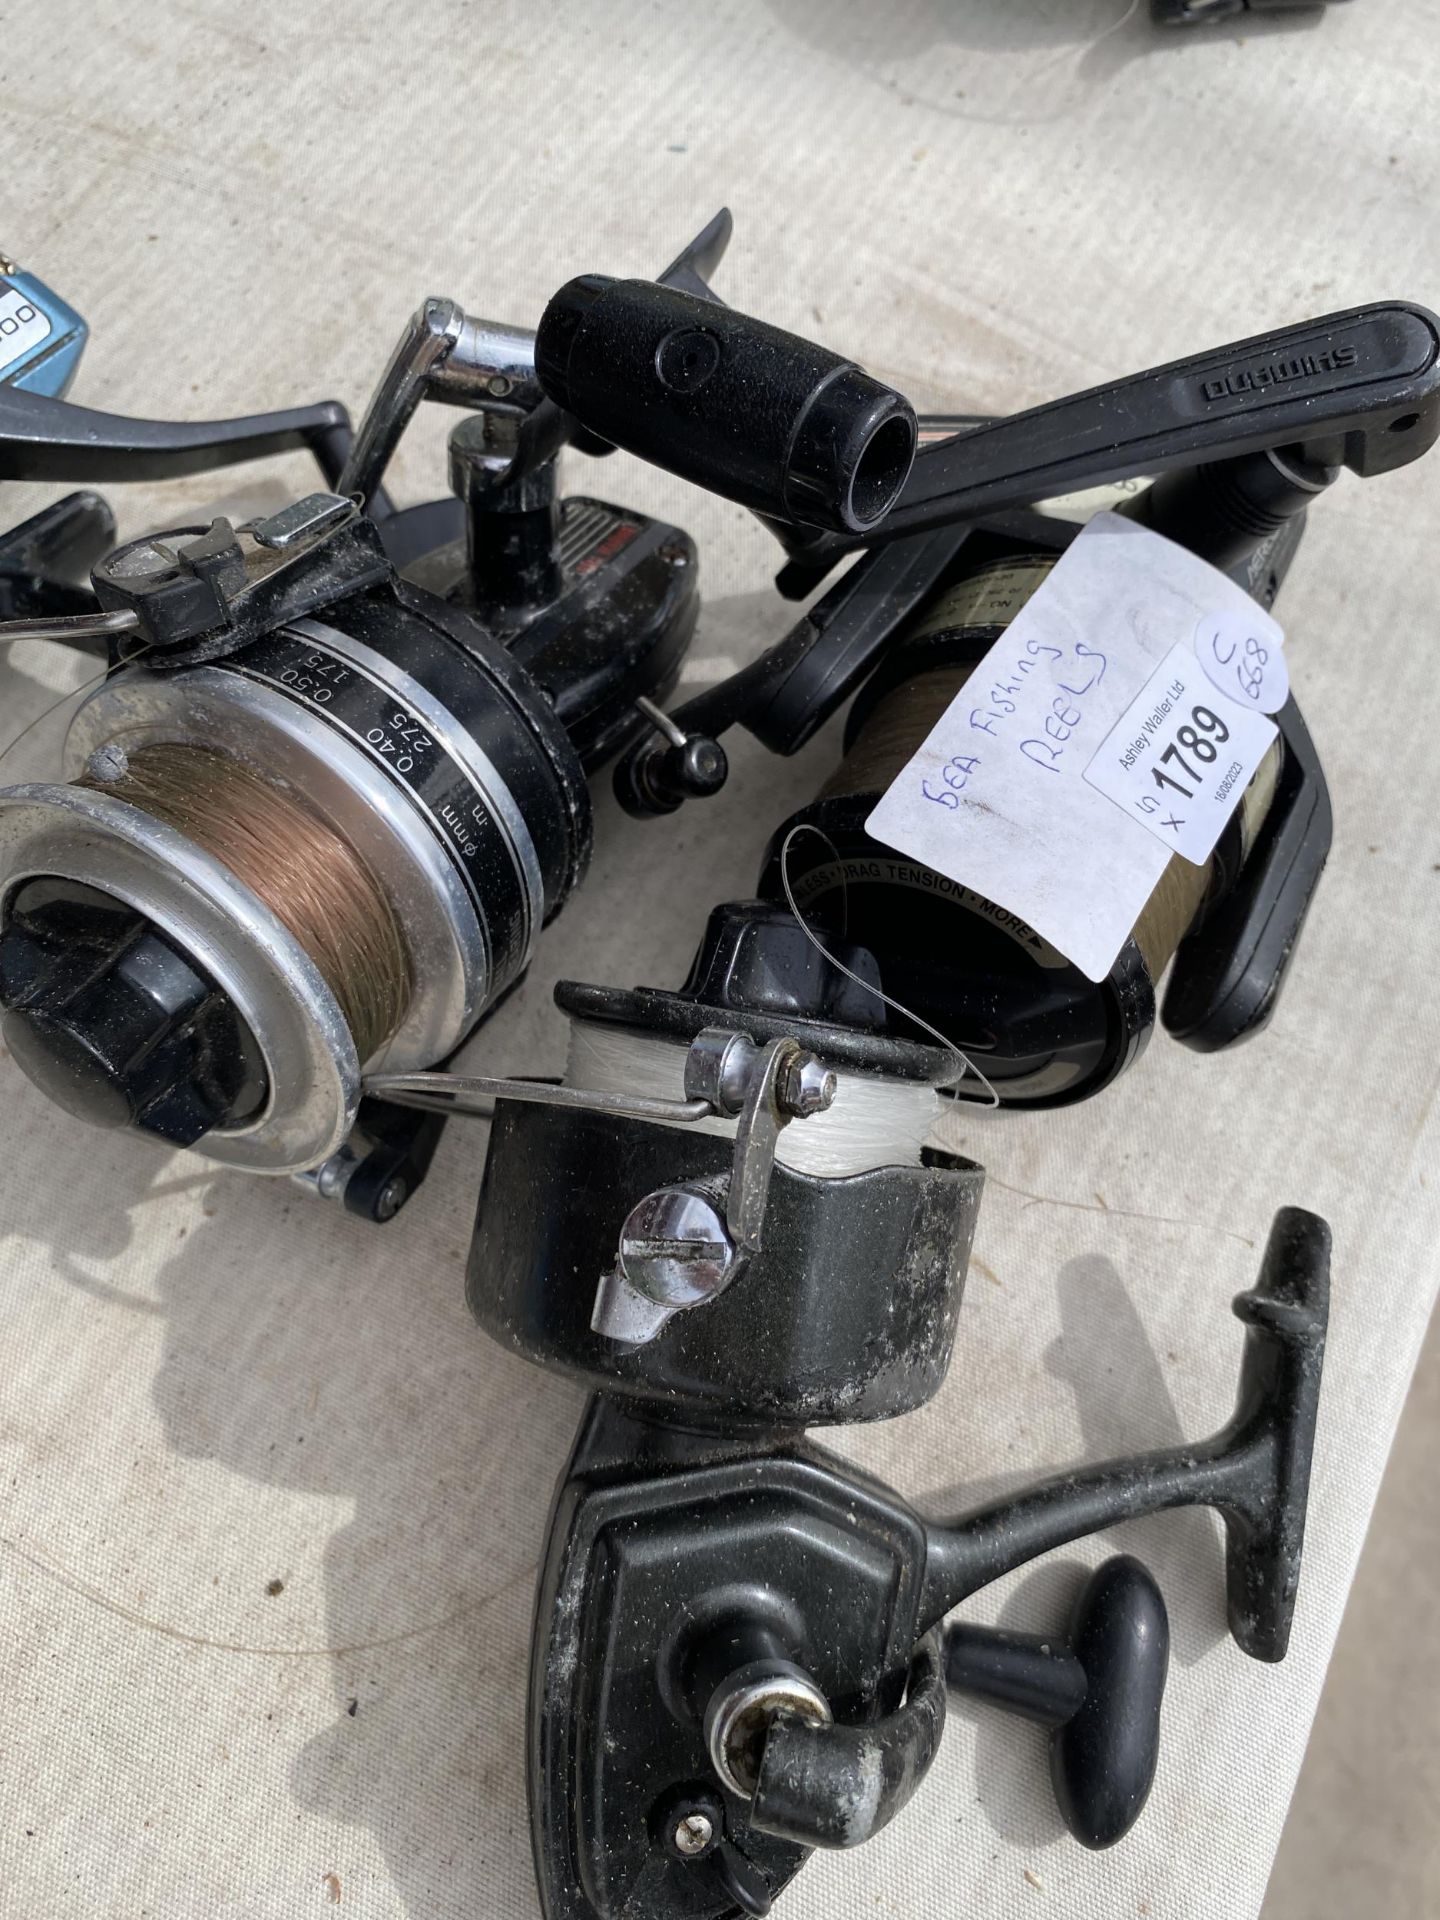 FIVE FISHING REELS OLYMPIC ETC - Image 3 of 3